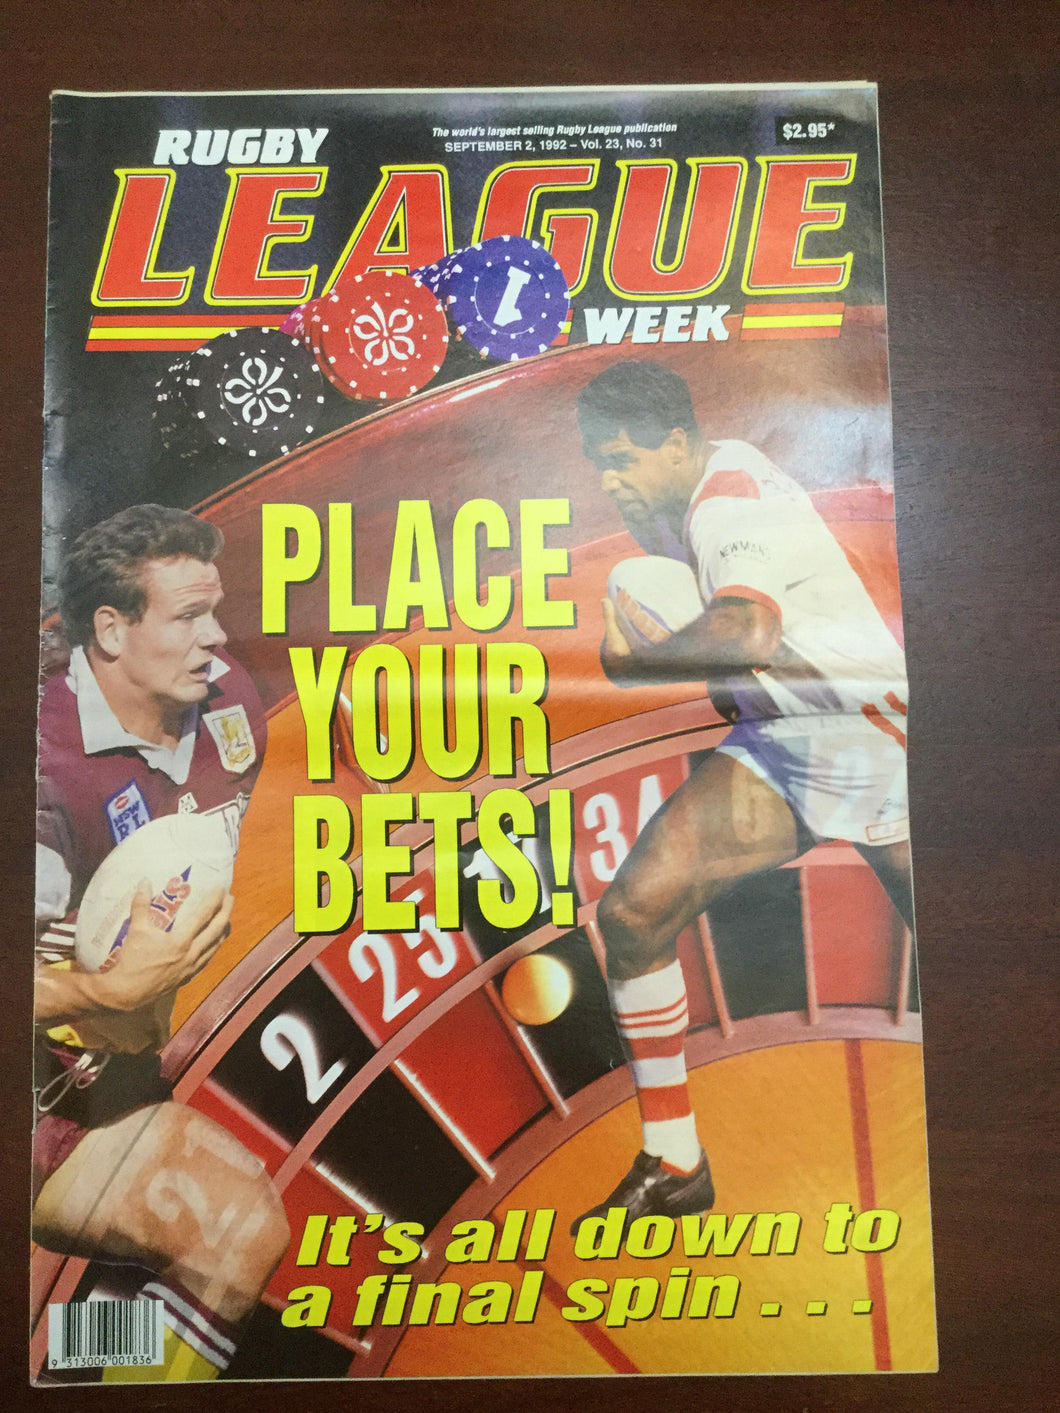 1992 Rugby League Week Magazine September 2 1992 - Vol 23 No. 31